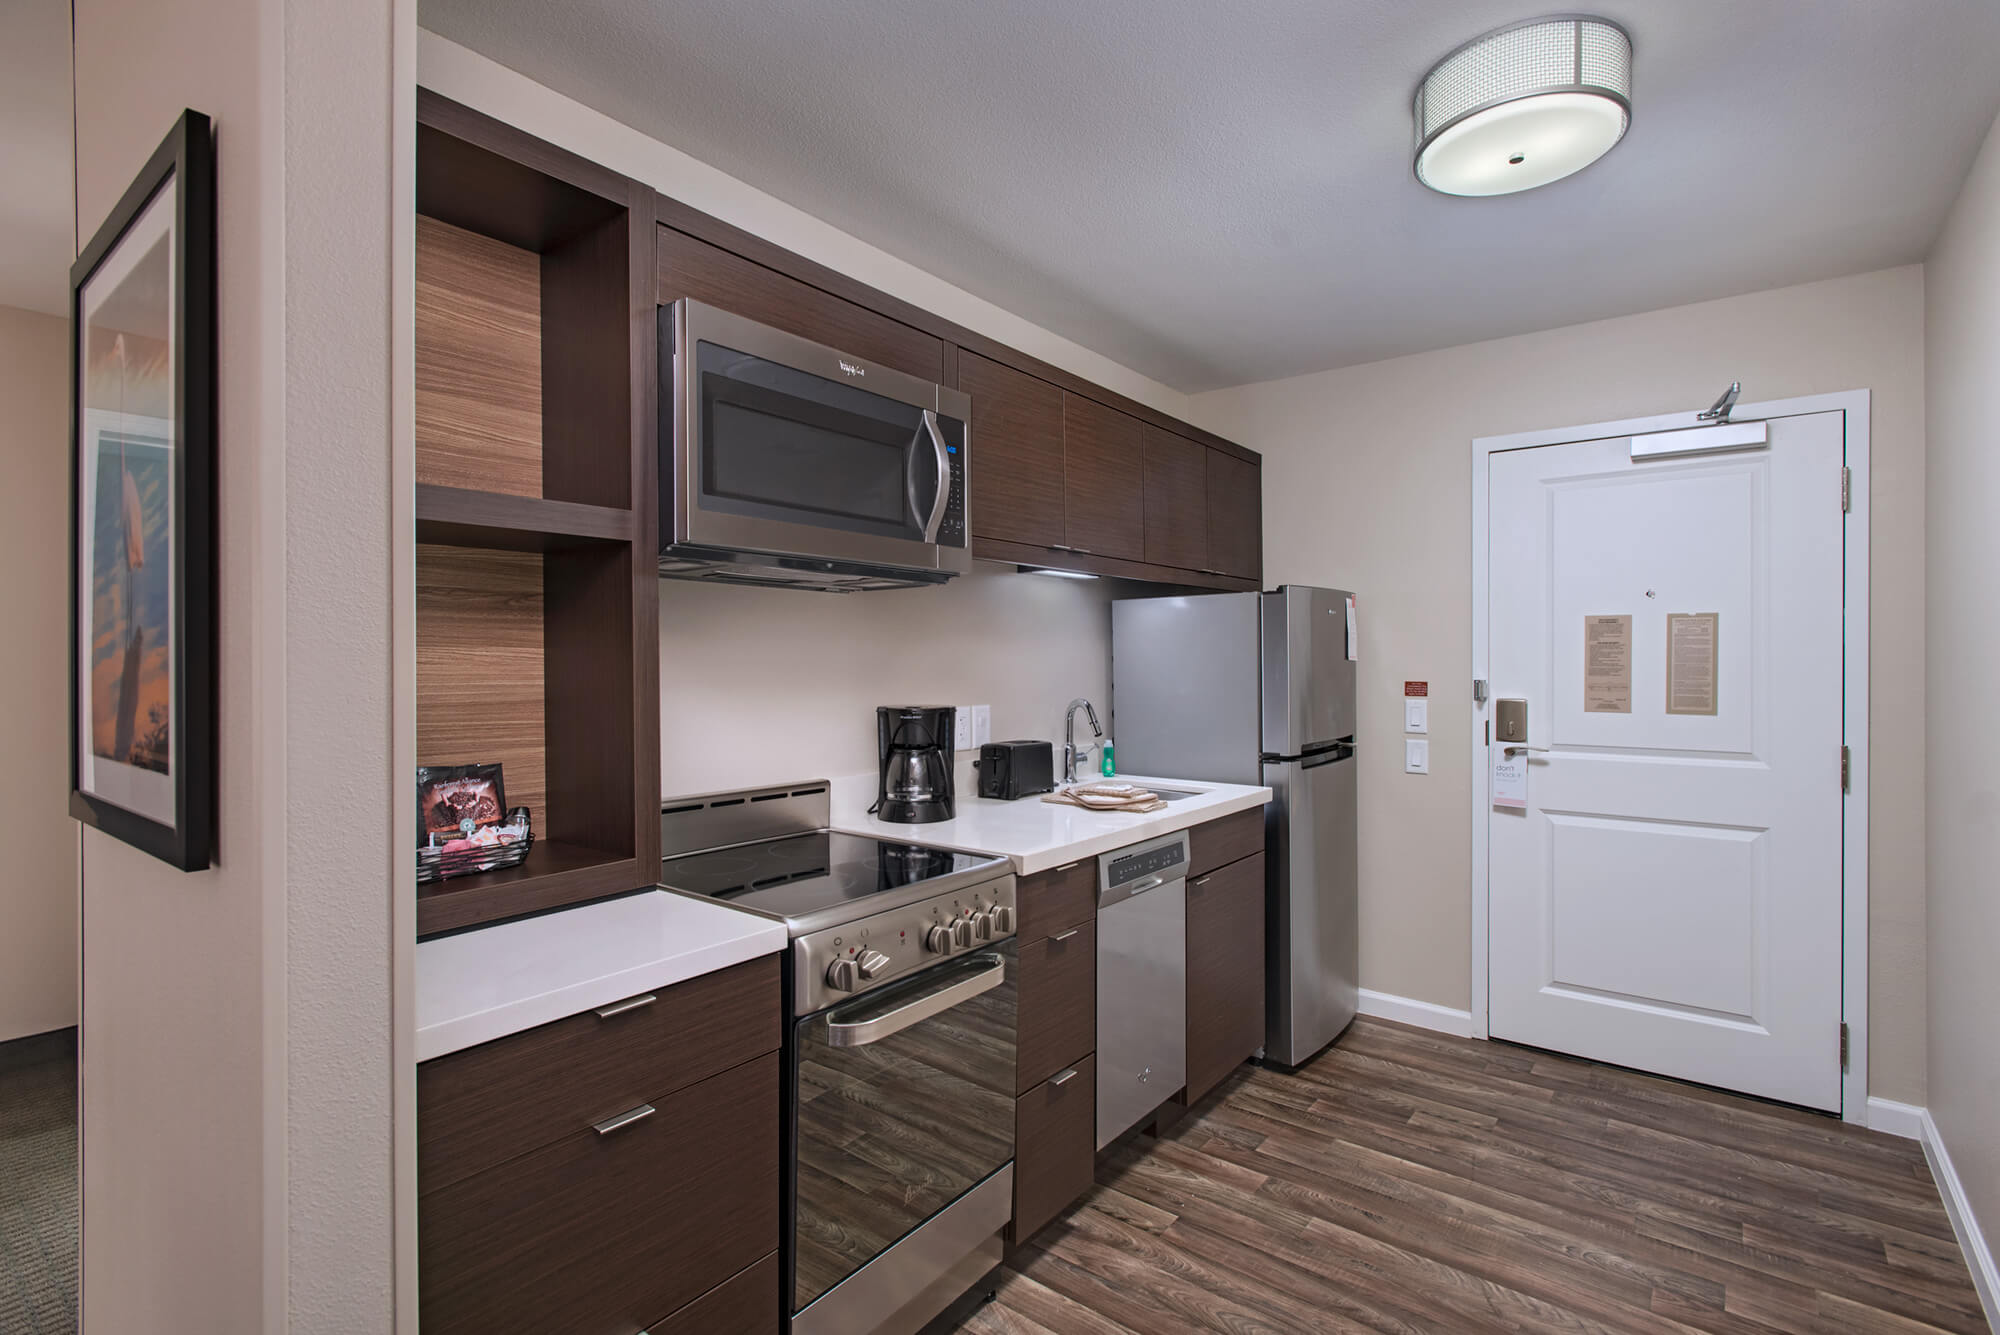 Kitchen area of suite at TownePlace Suites Lakeland